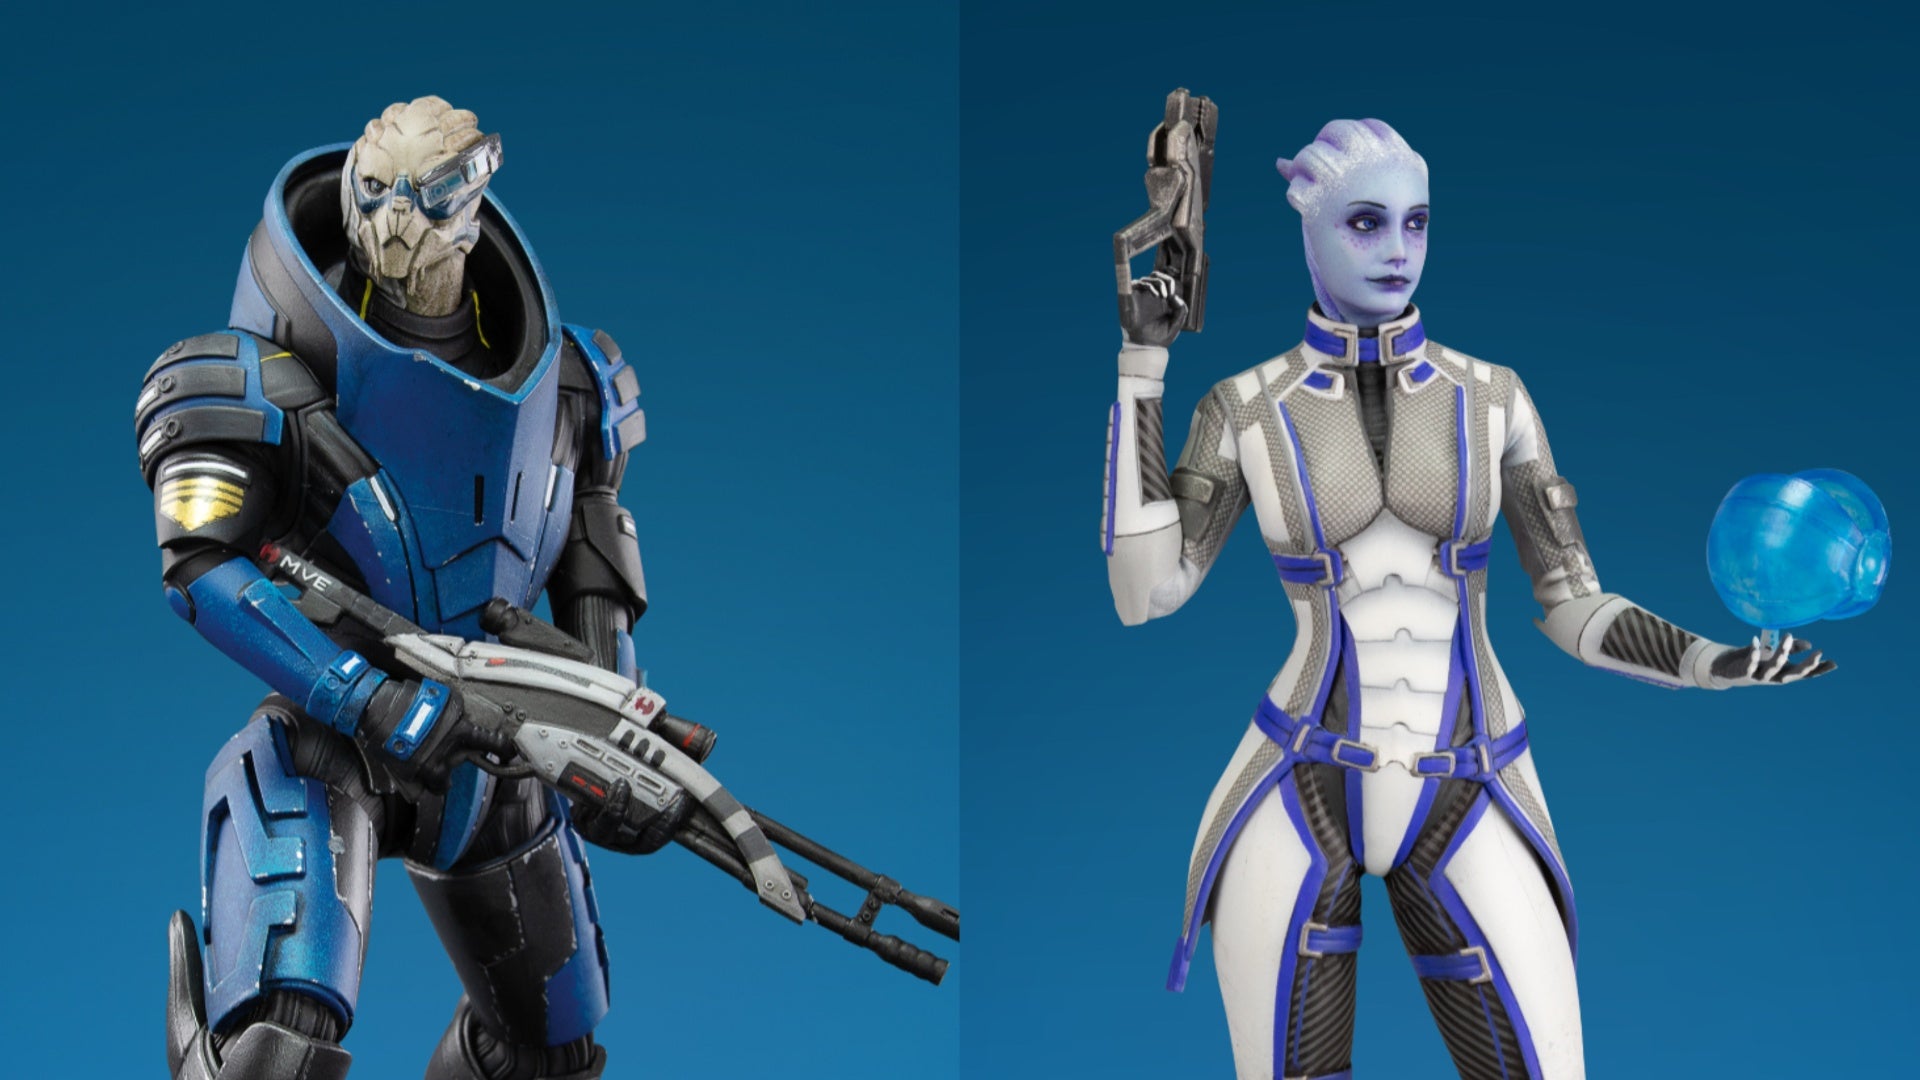 You are currently viewing Dark Horse Releases New Mass Effect Figures: Exclusive Reveal by GizmohMan